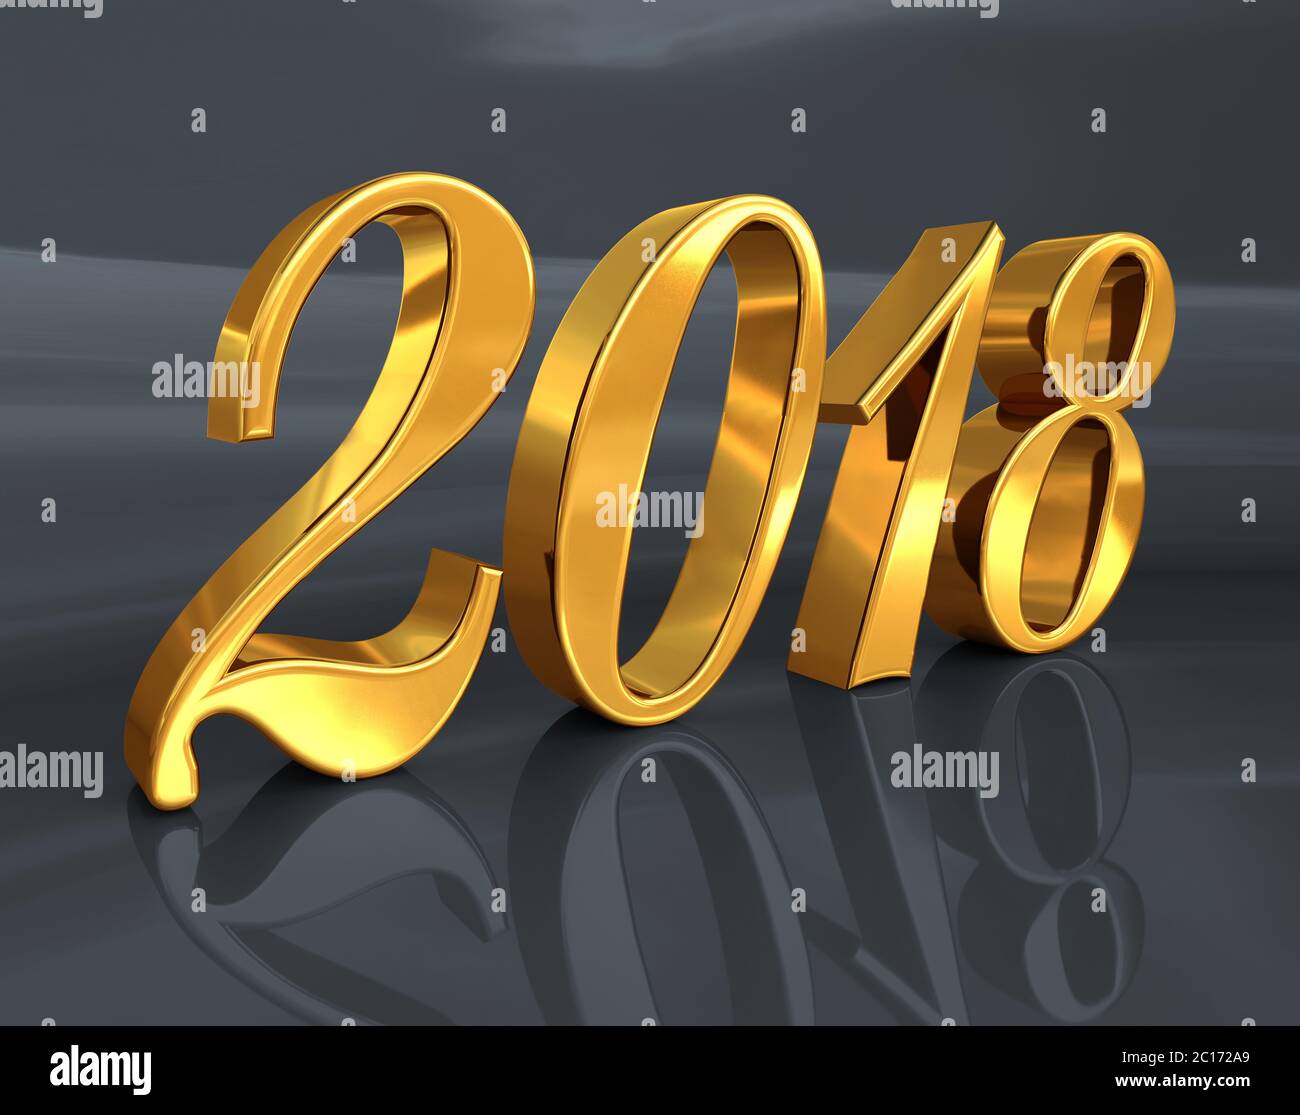 2018, Golden 3D Numbers on a Festive Background Stock Photo